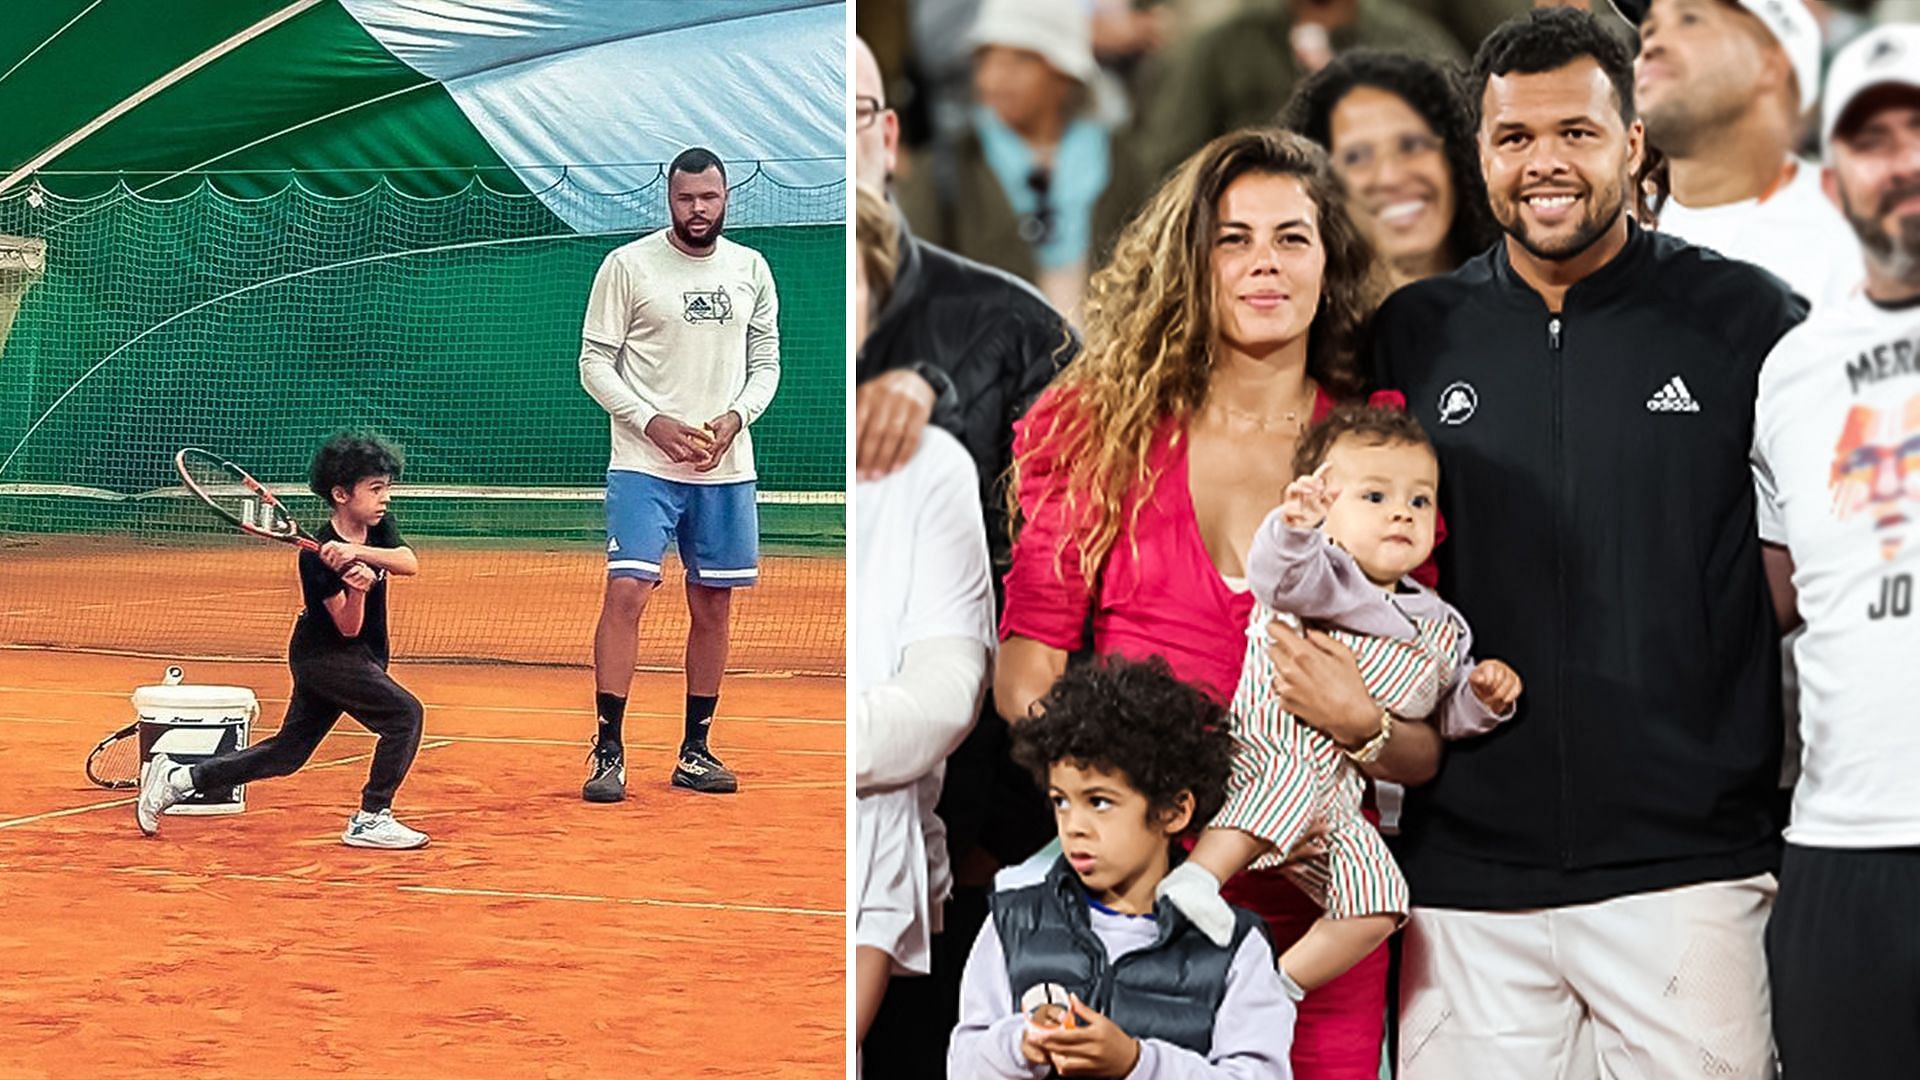 Jo-Wilfried Tsonga turned into a tennis coach for his son